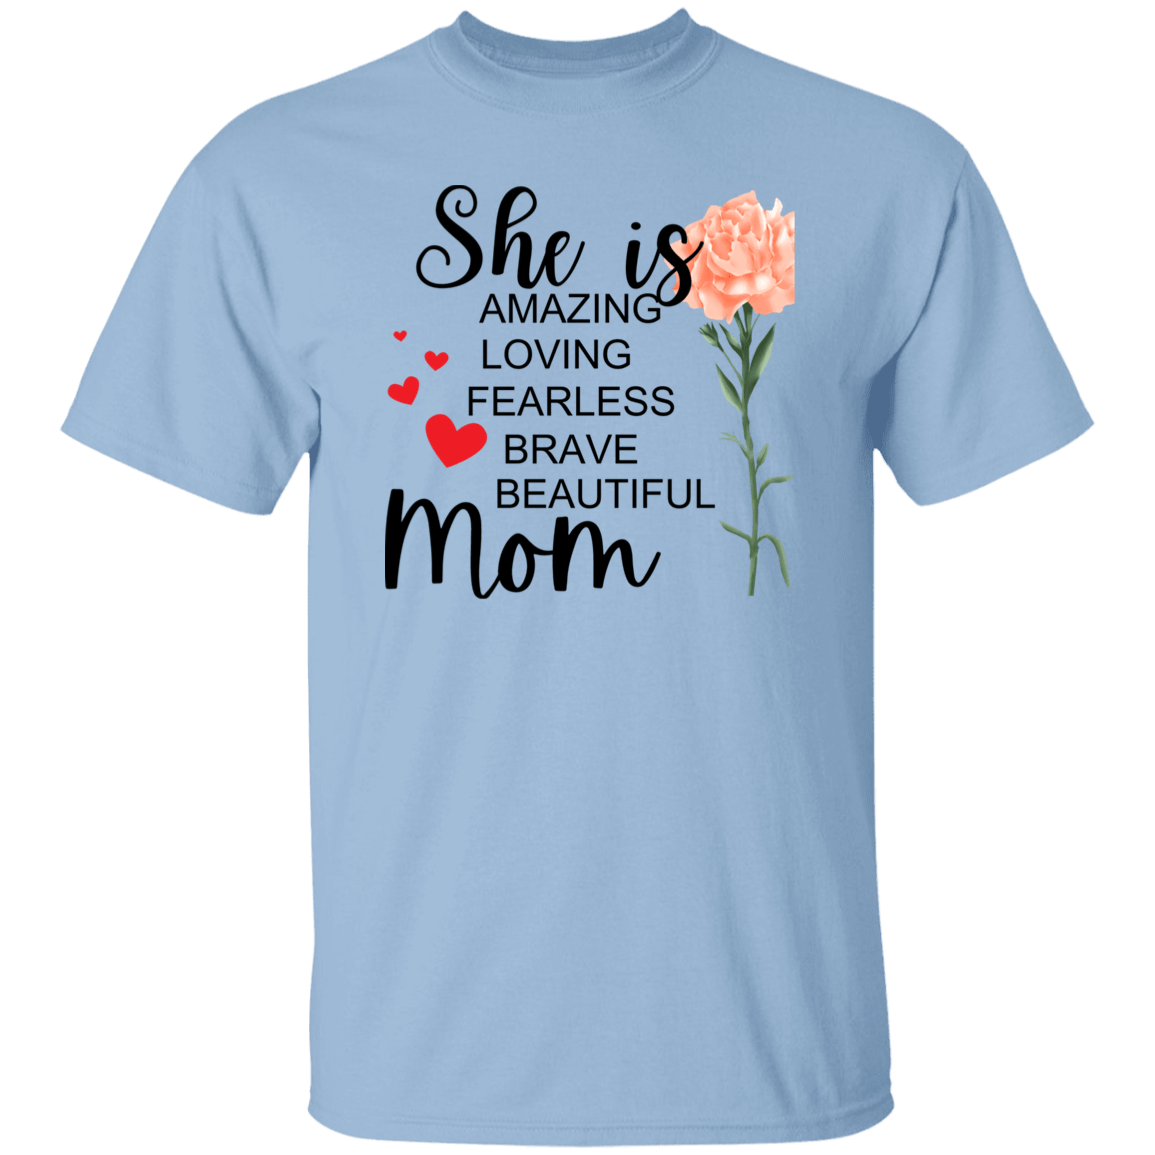 She is... T-Shirt